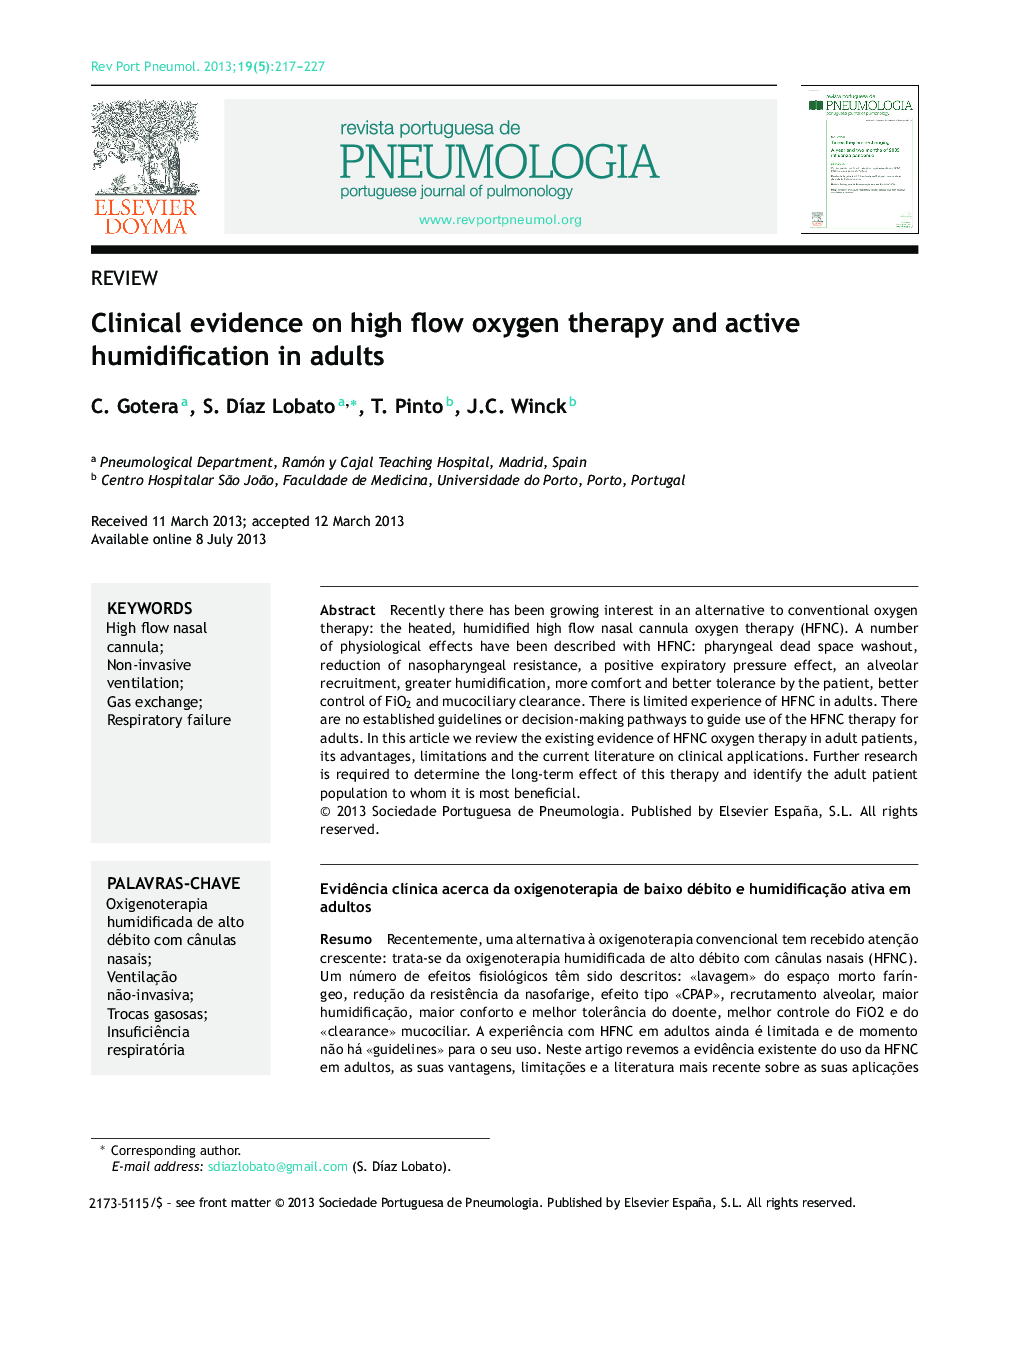 Clinical evidence on high flow oxygen therapy and active humidification in adults